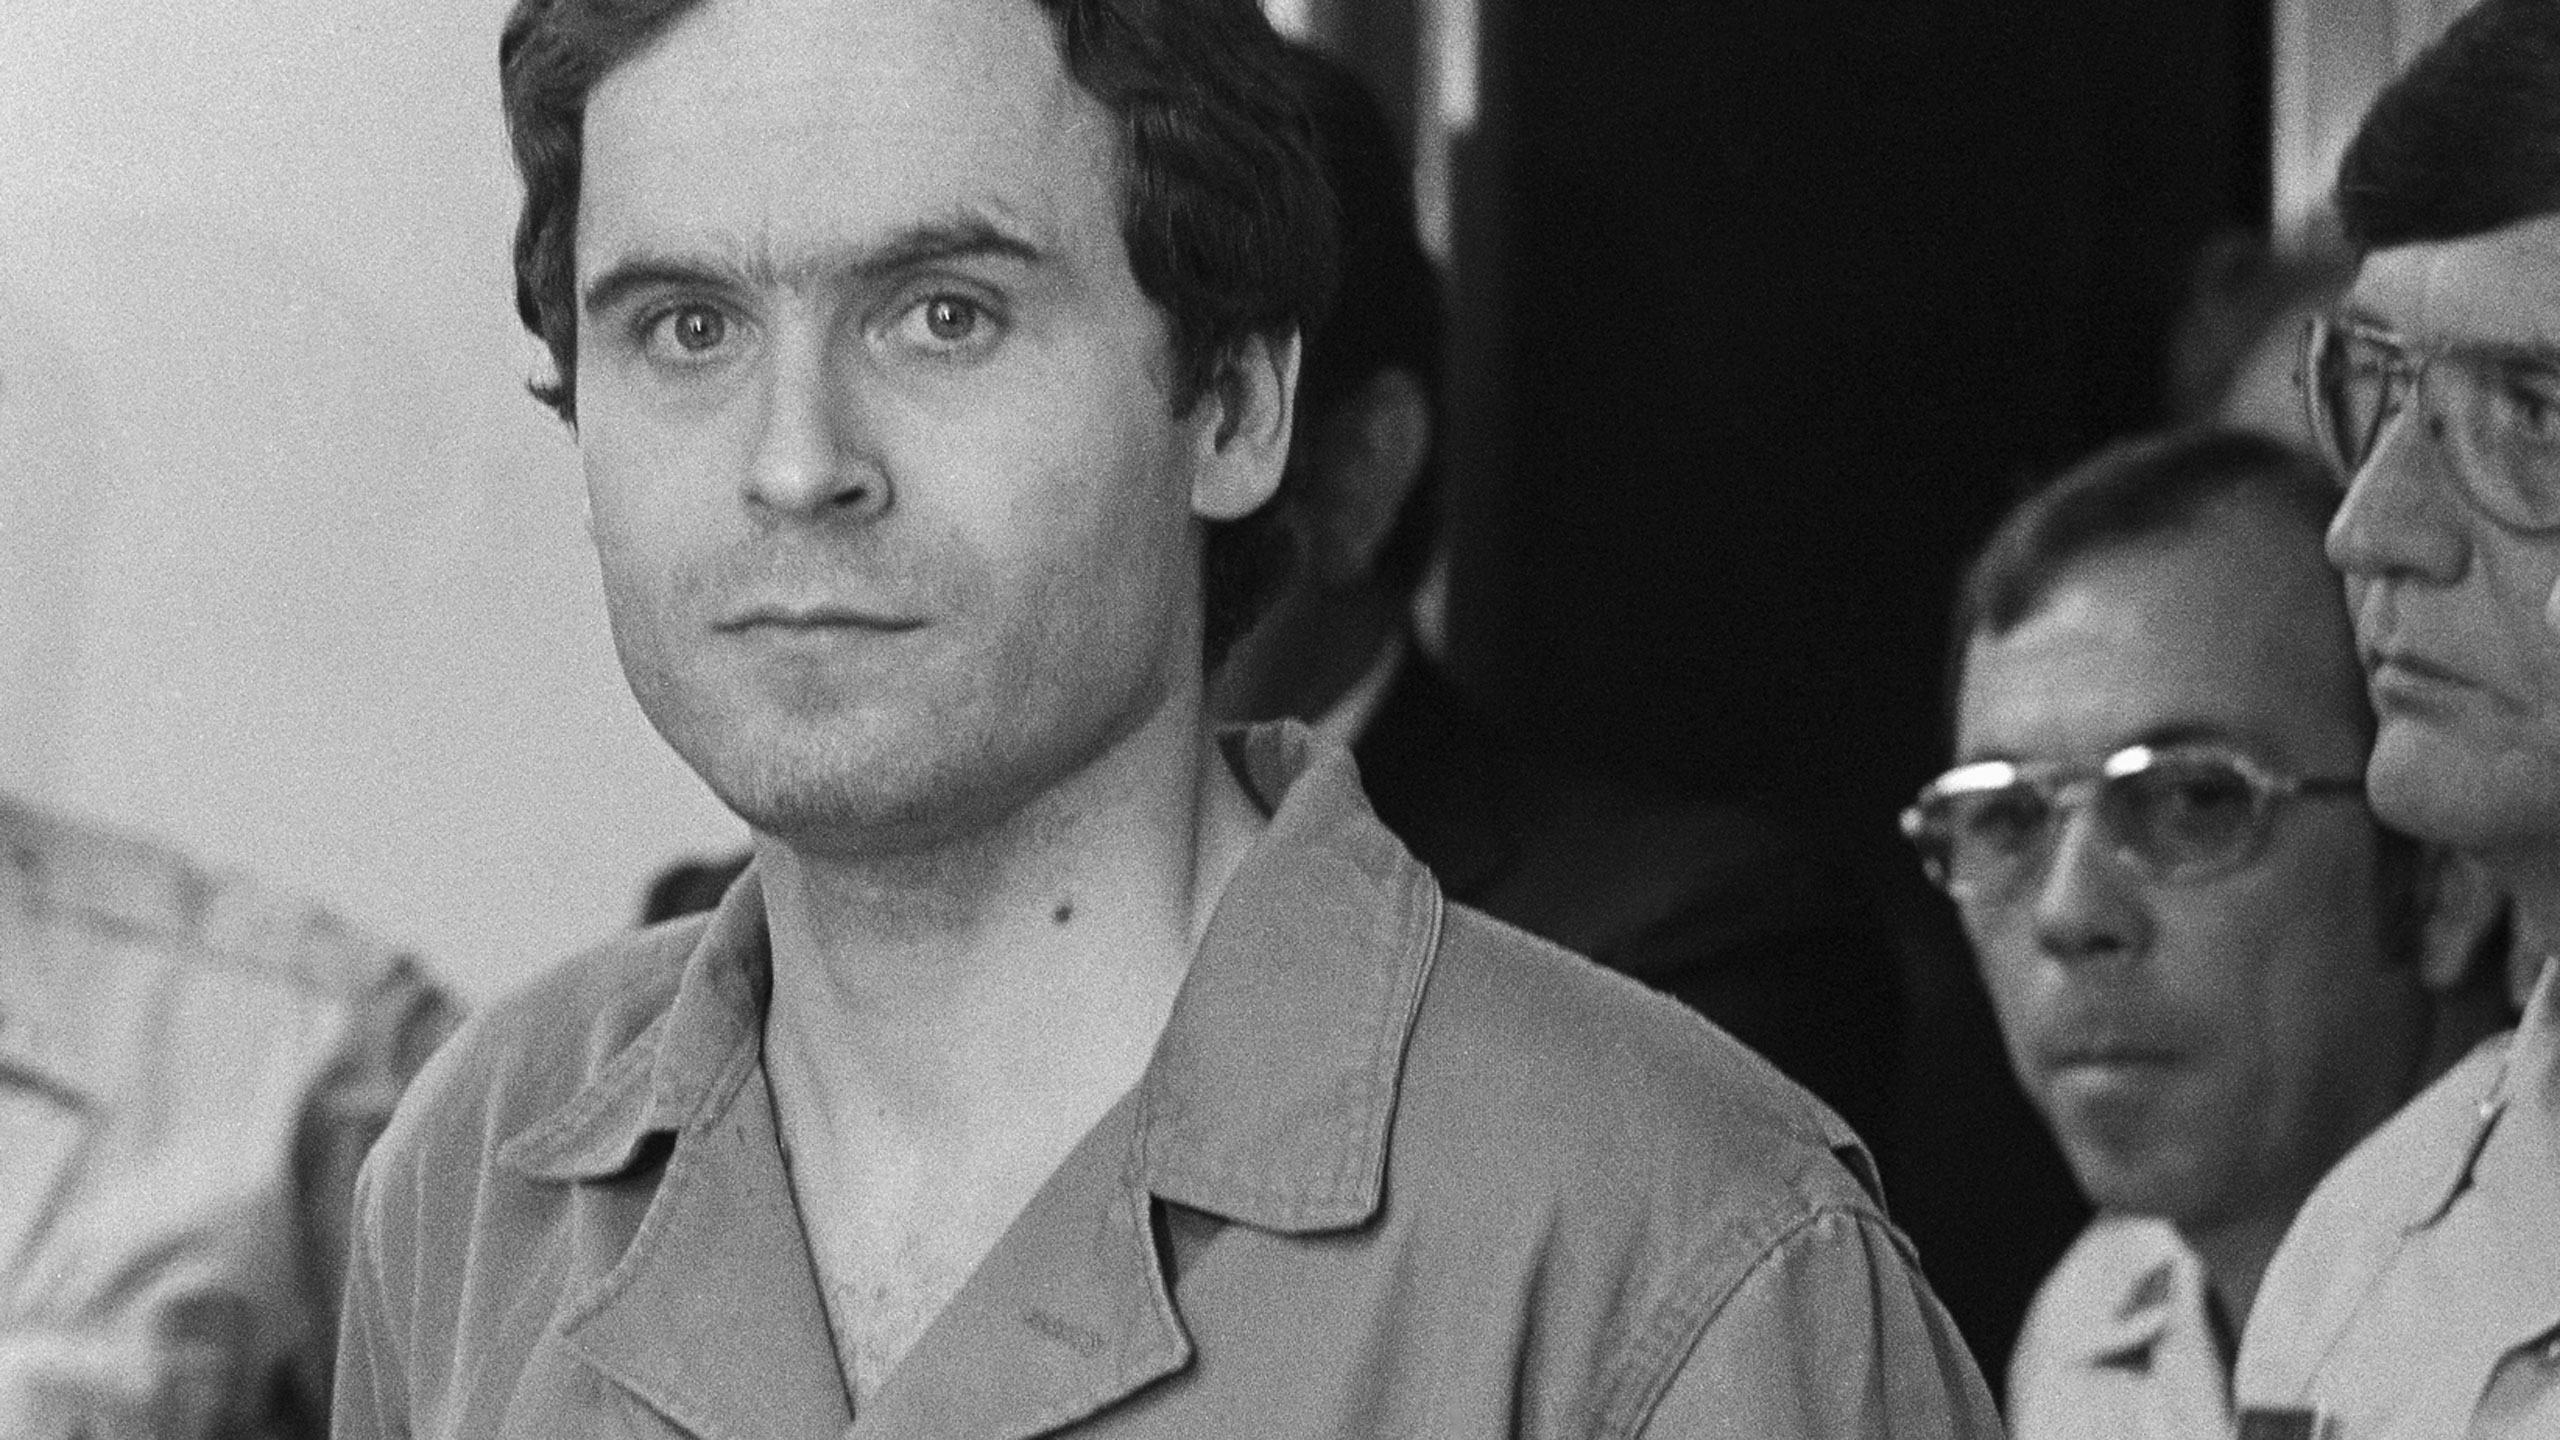 The 5 Serial Killers of 'Invisible Monsters' Were All Operating at the Same Time